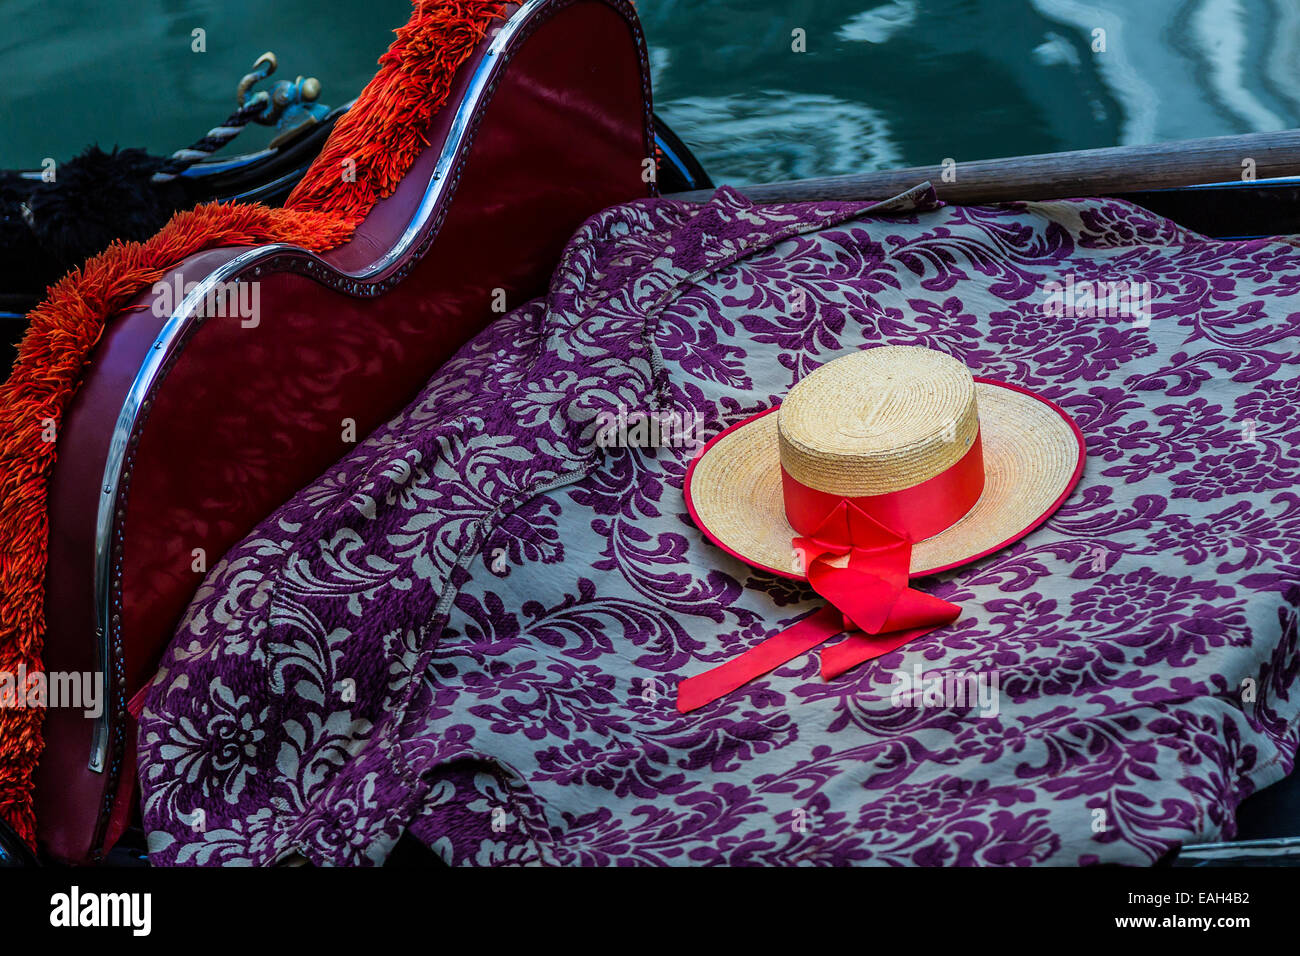 Gondoliers hat on the seat of a gondola Stock Photo